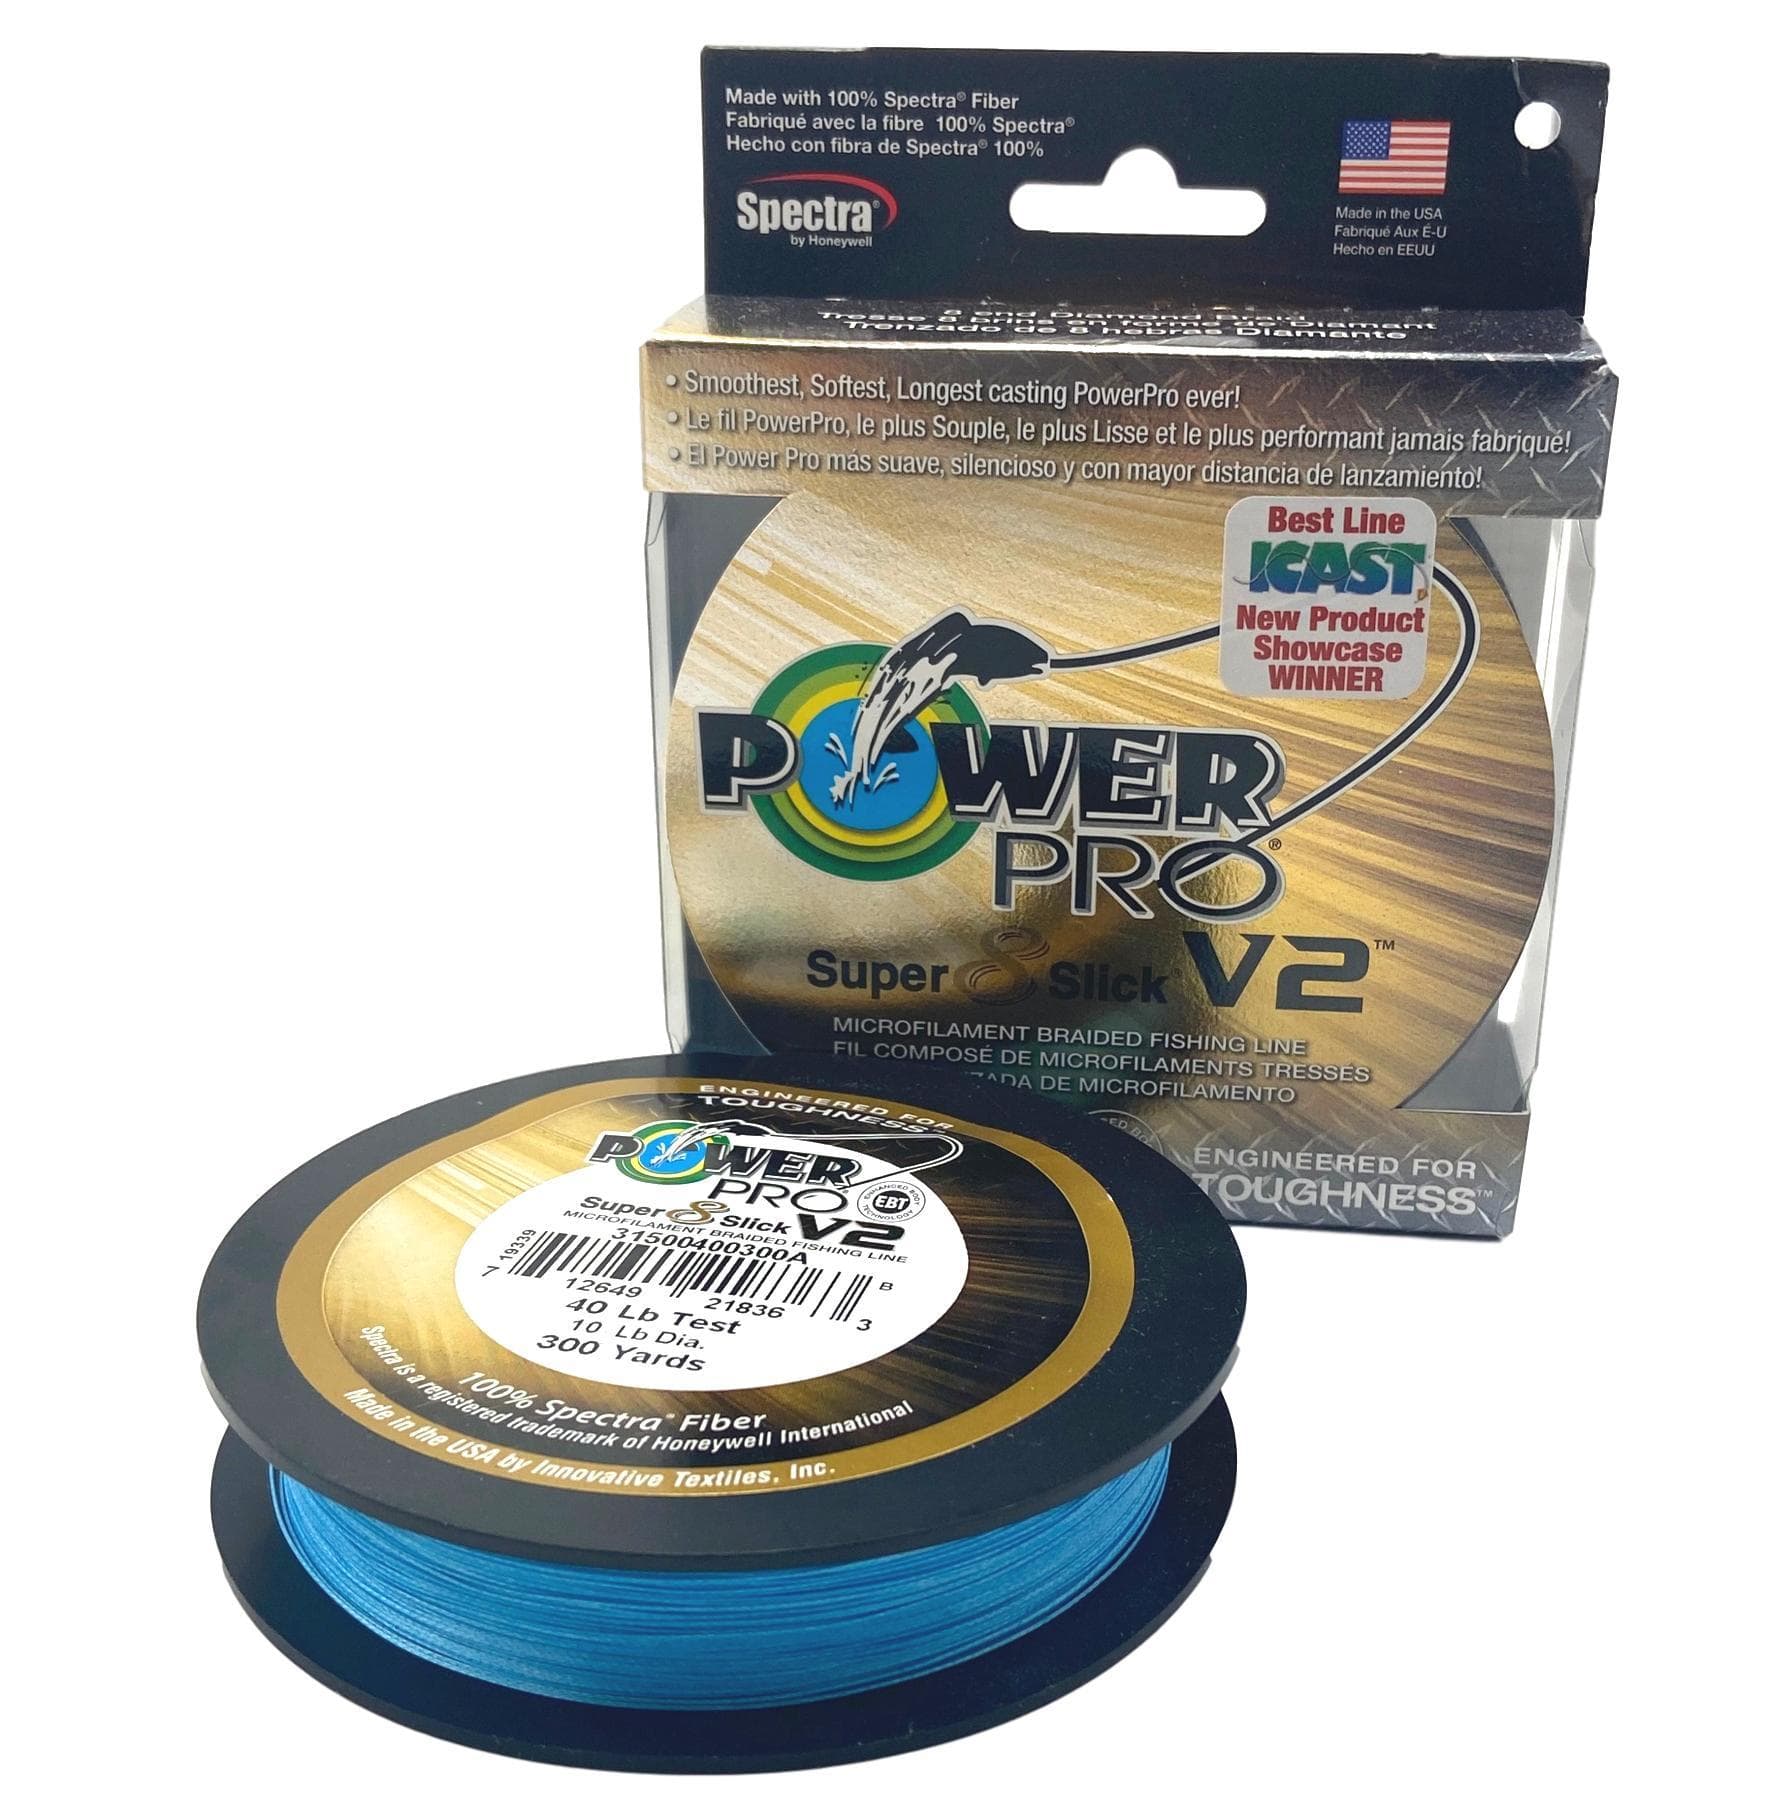 Braided Fishing Line Tagged braided-fishing-line - The Saltwater Edge